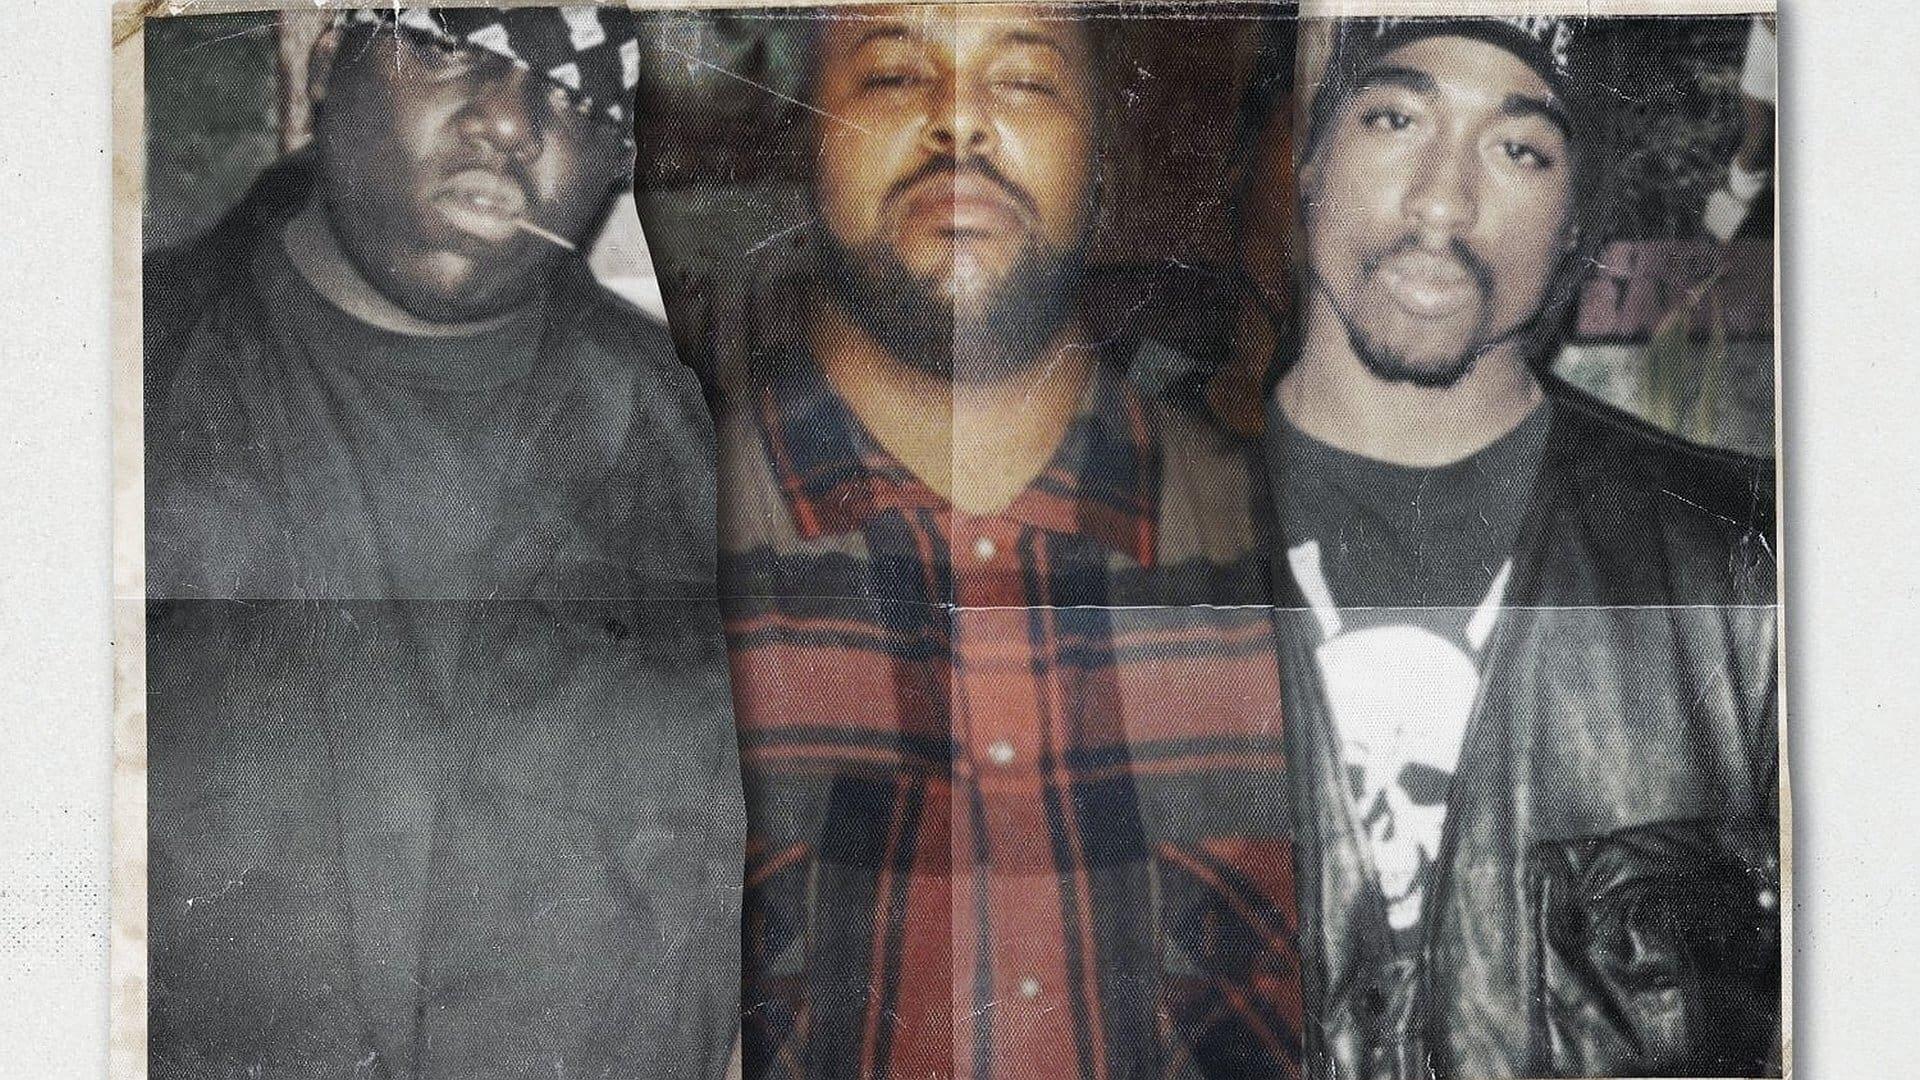 Last Man Standing: Suge Knight and the Murders of Biggie and Tupac backdrop